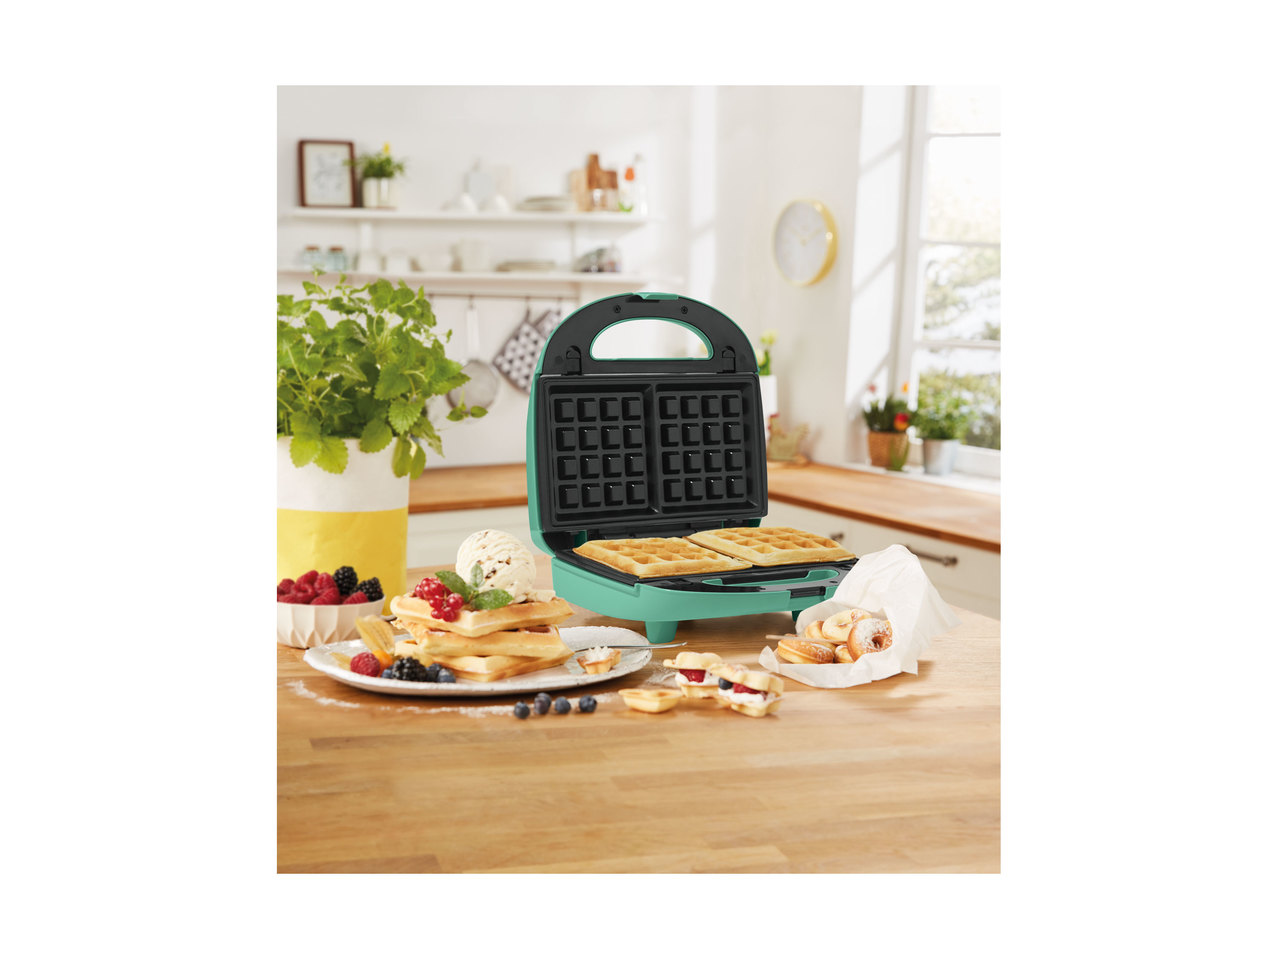 Silvercrest Waffle Maker with Interchangeable Plates1